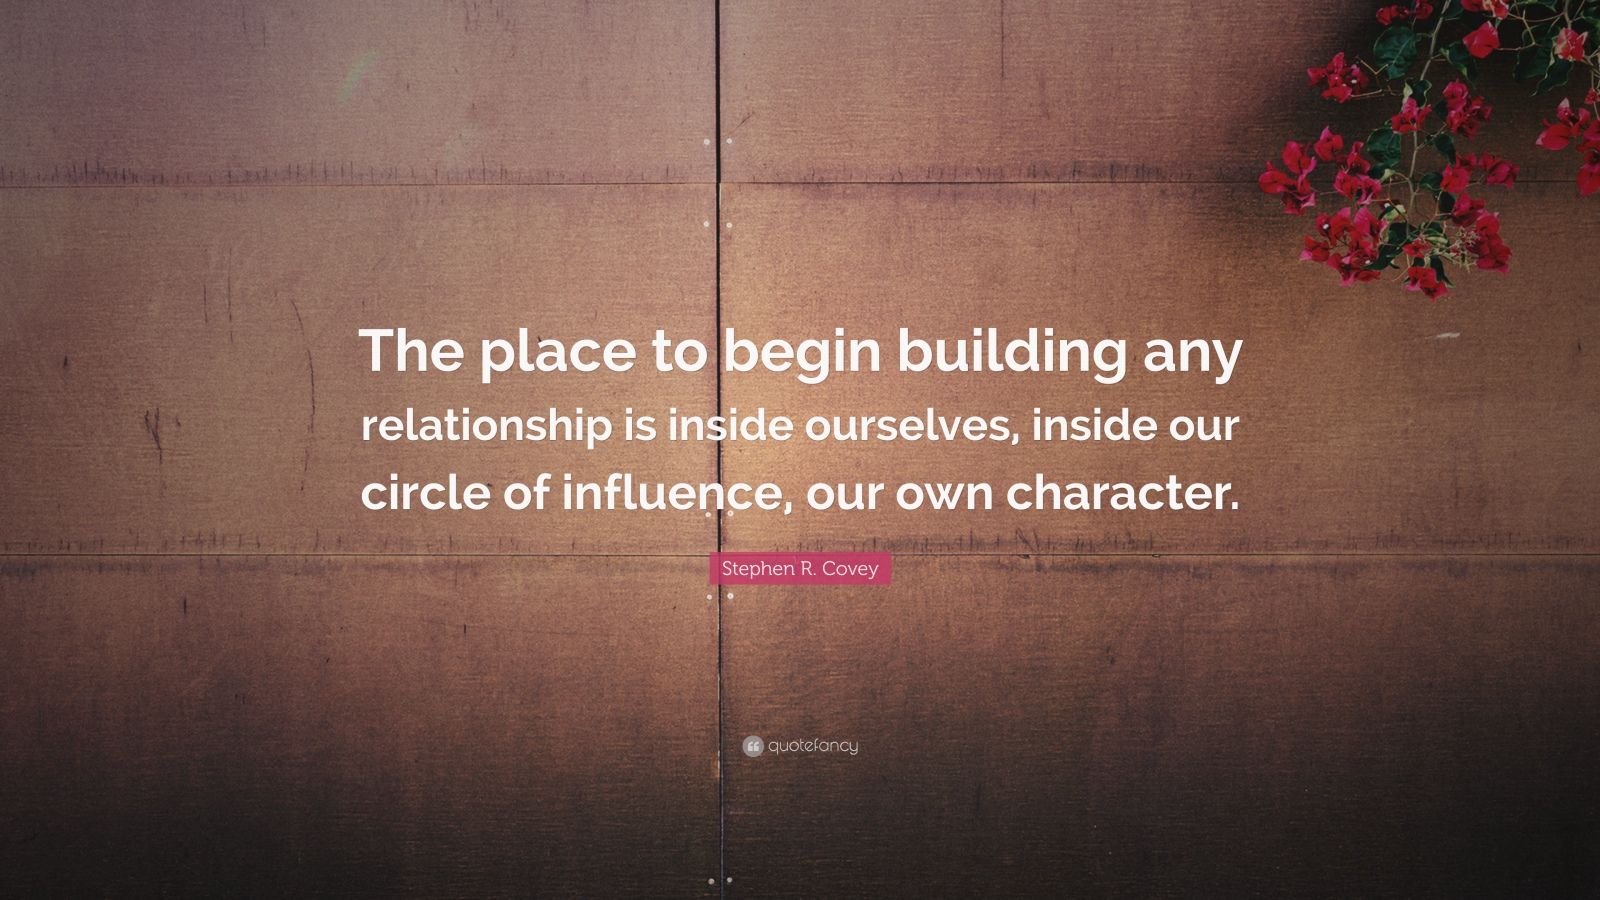 Stephen R. Covey Quote: “The place to begin building any relationship